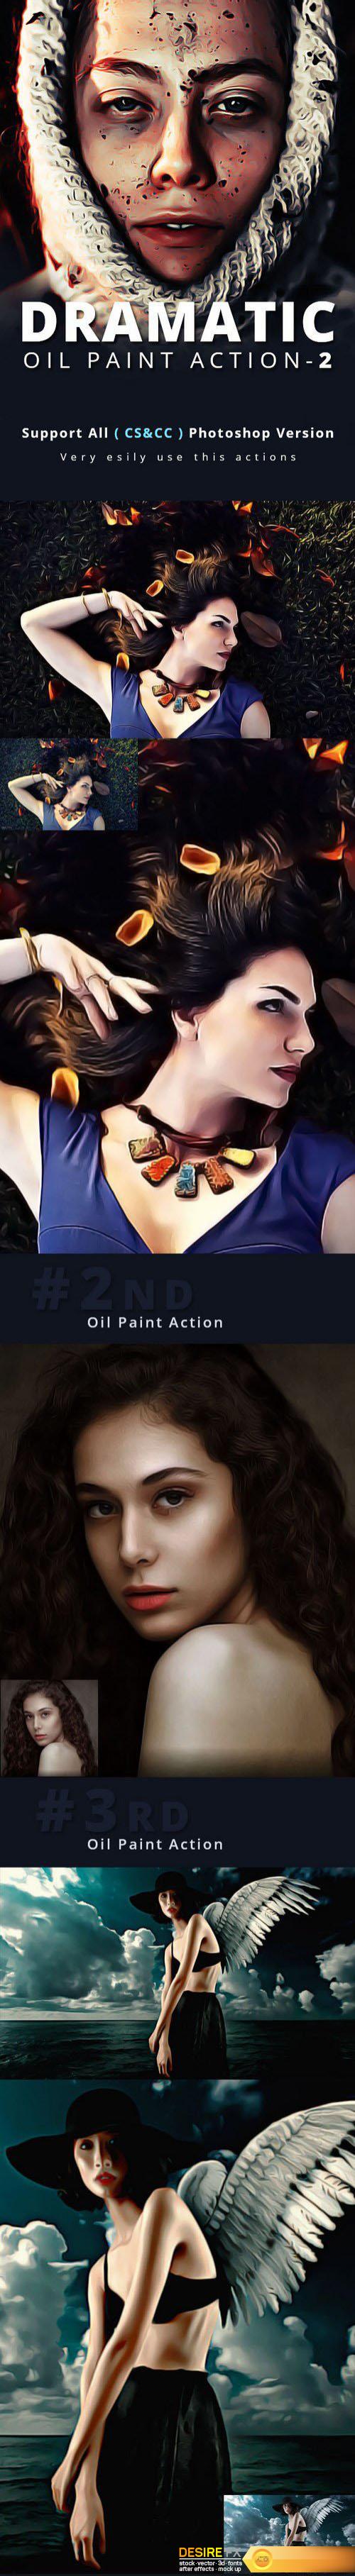 GraphicRiver - Dramatic Oil Paint Action V2